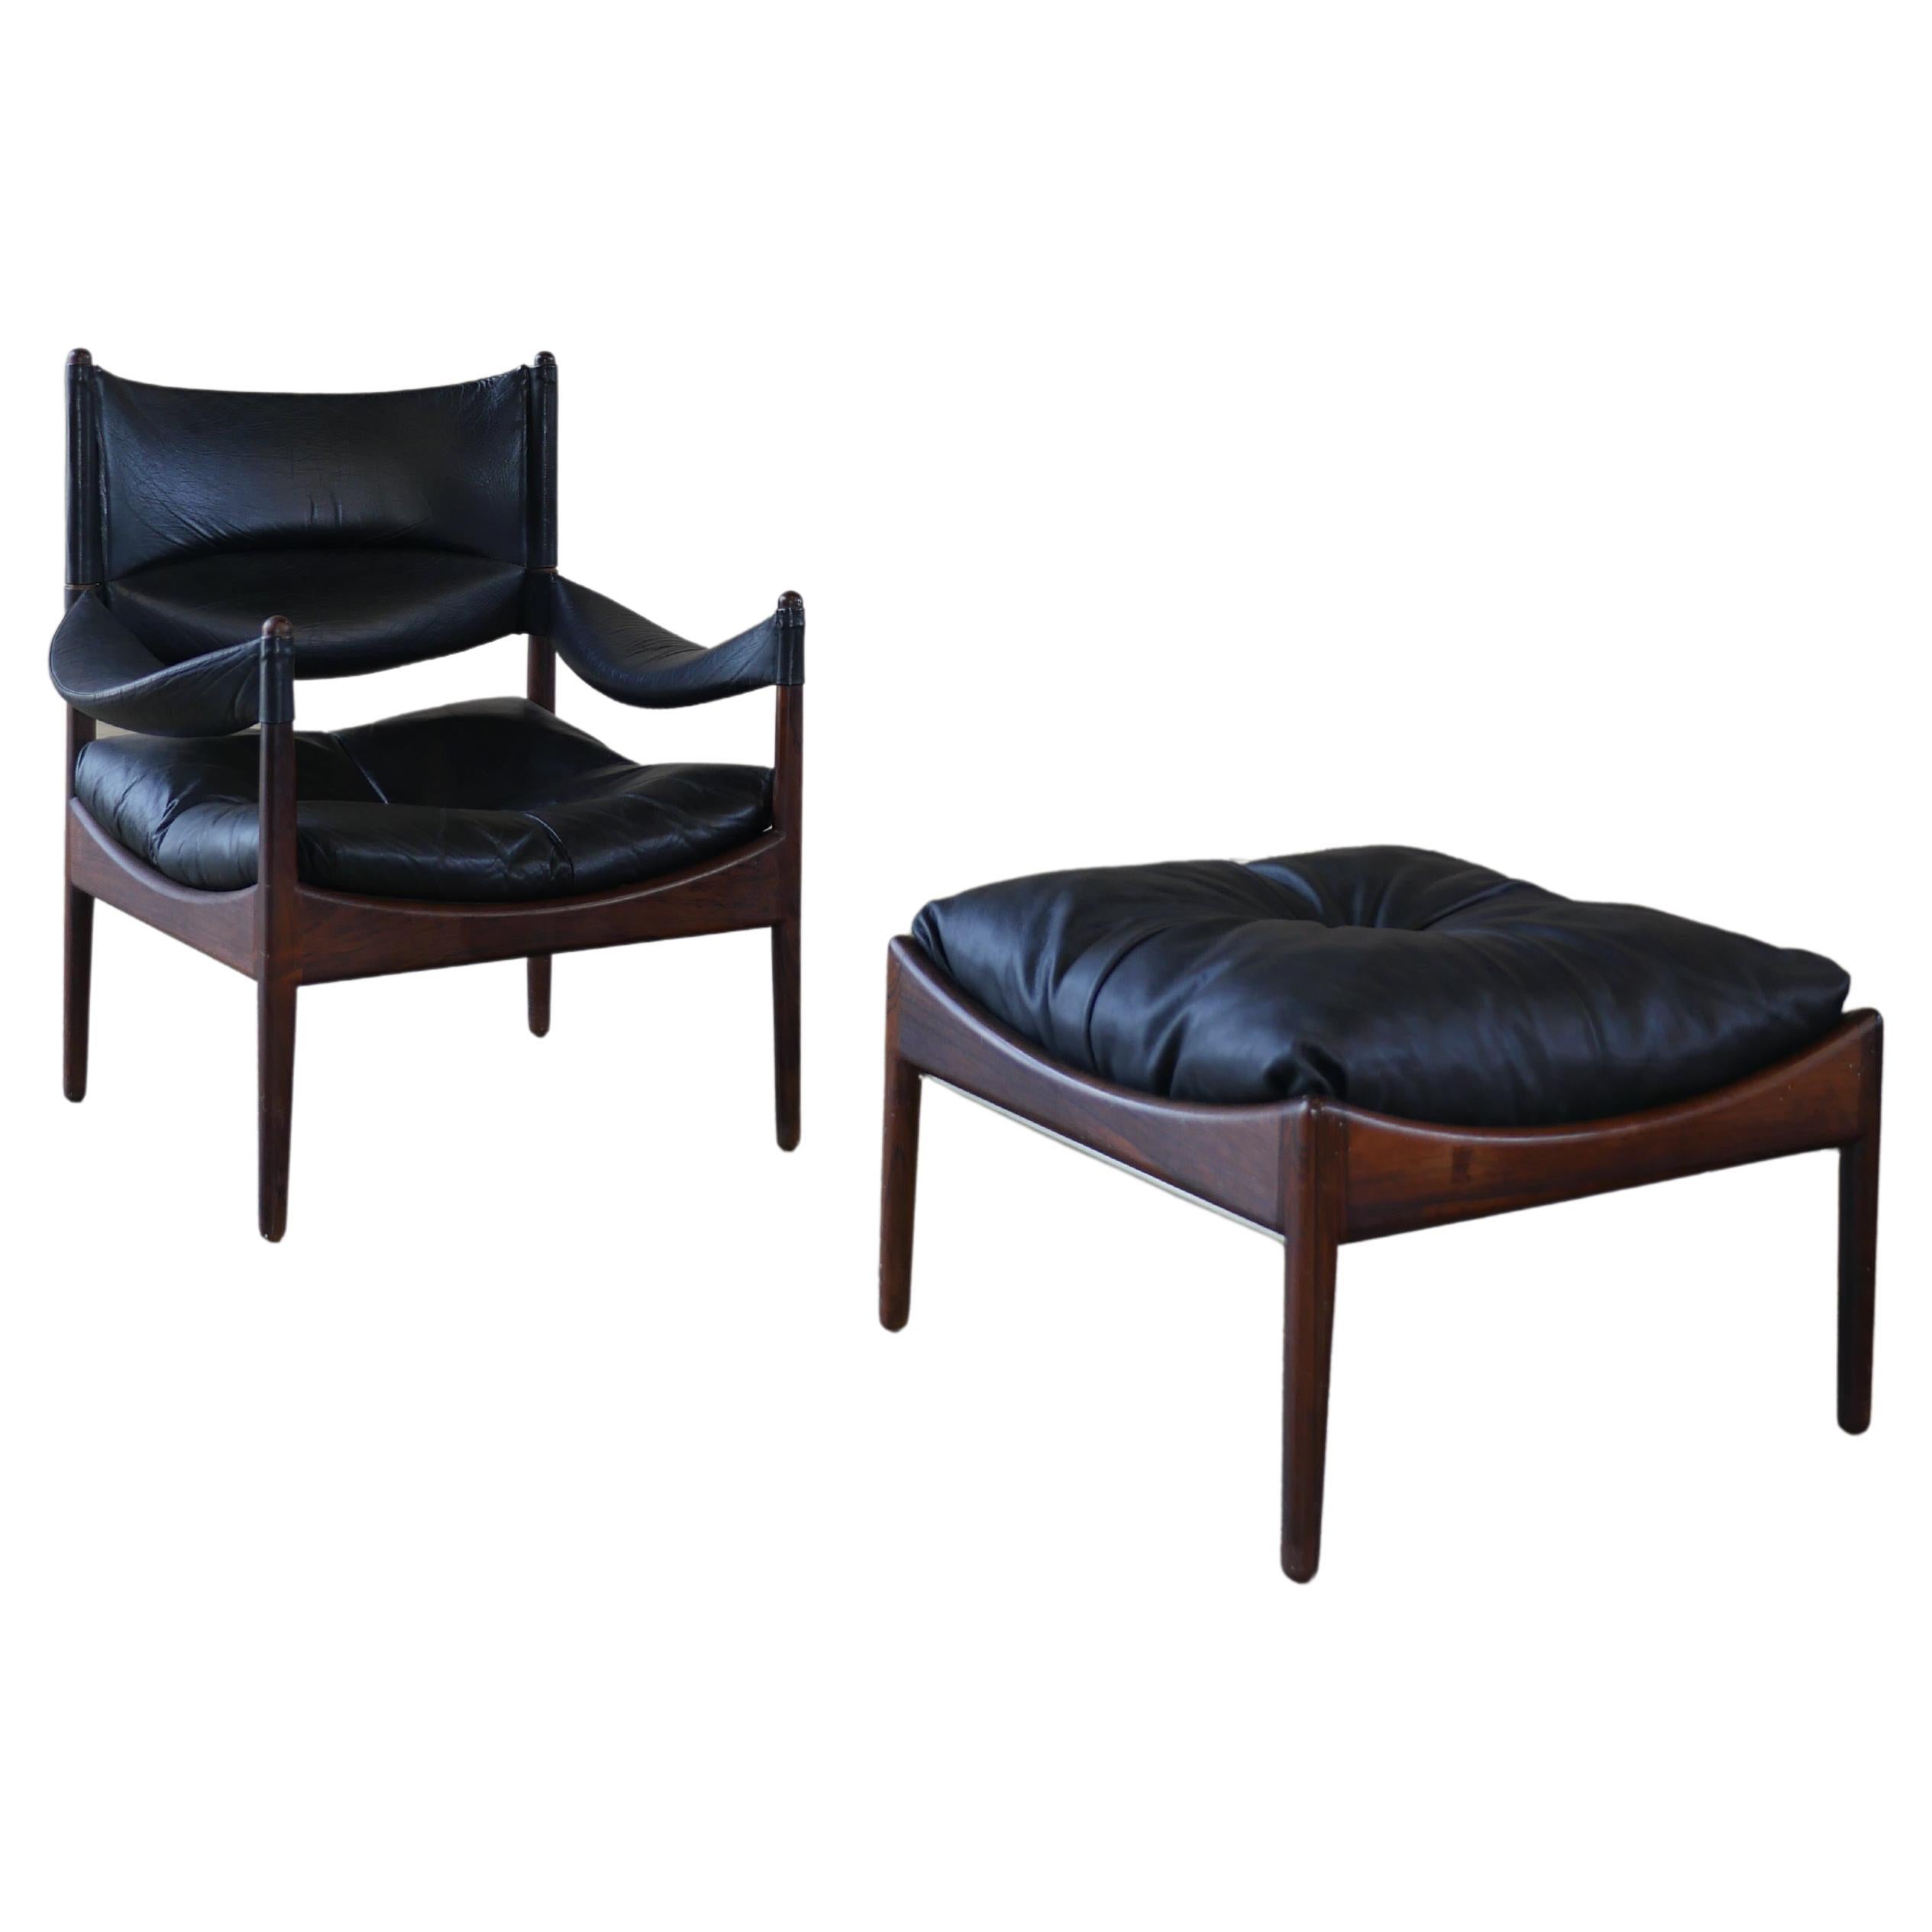 1960s Kristian Solmer Vedel Mid-Century Danish Modern Leather & Rosewood Lounge